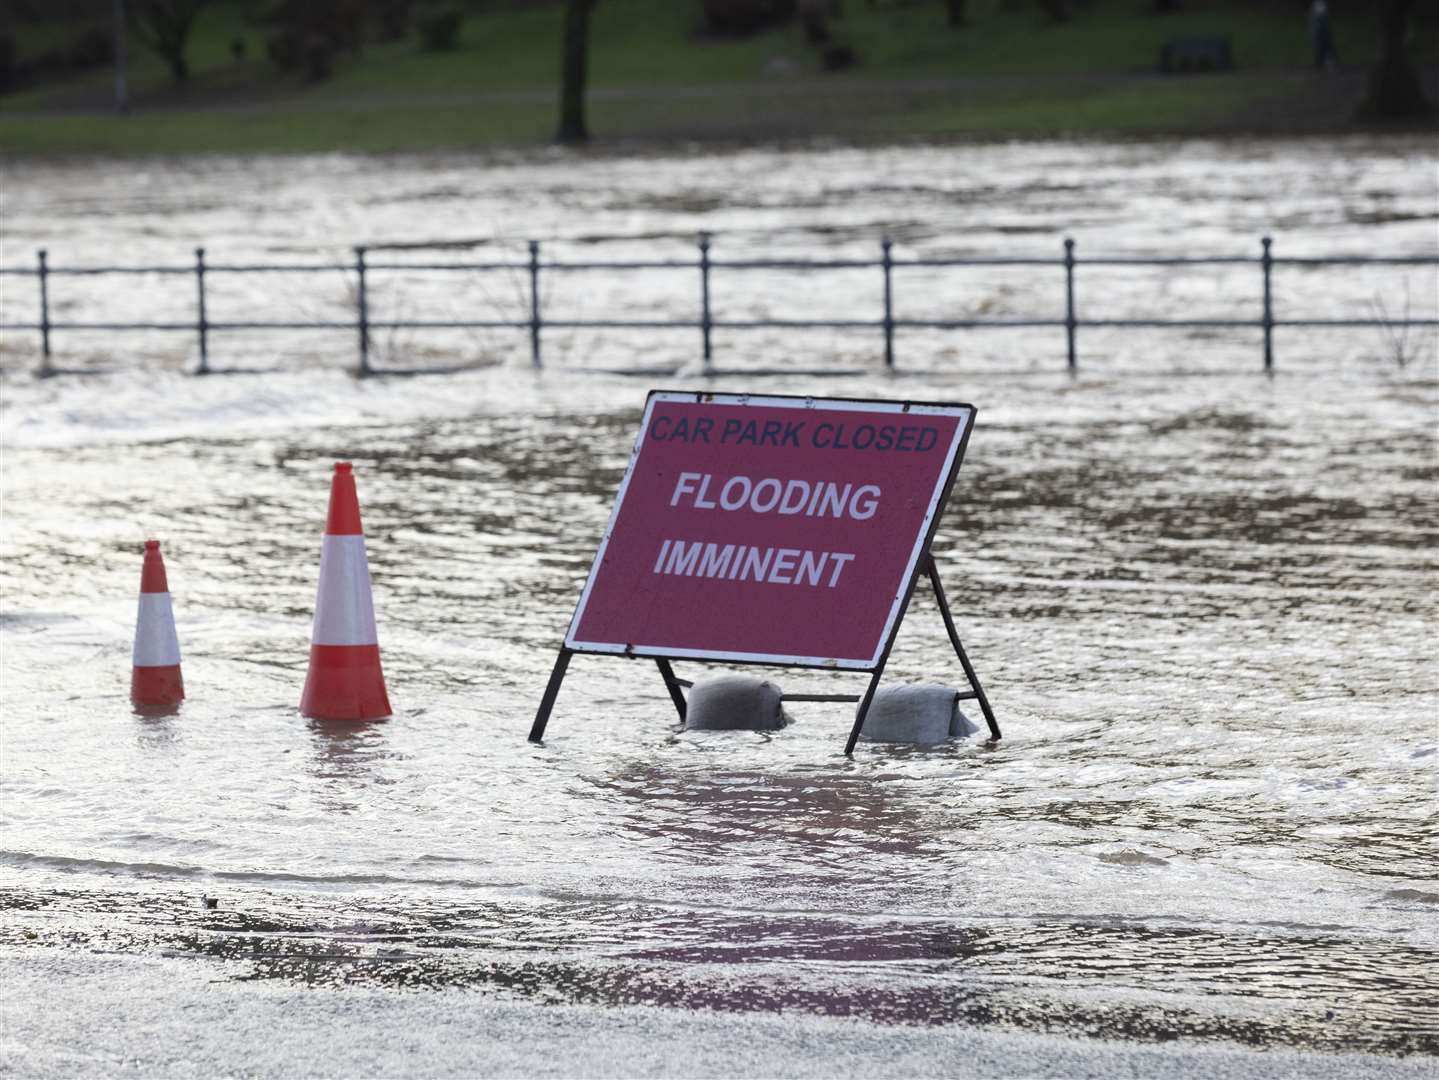 Parts of Scotland were inundated by flooding ahead of the weekend (Robert Perry/PA)